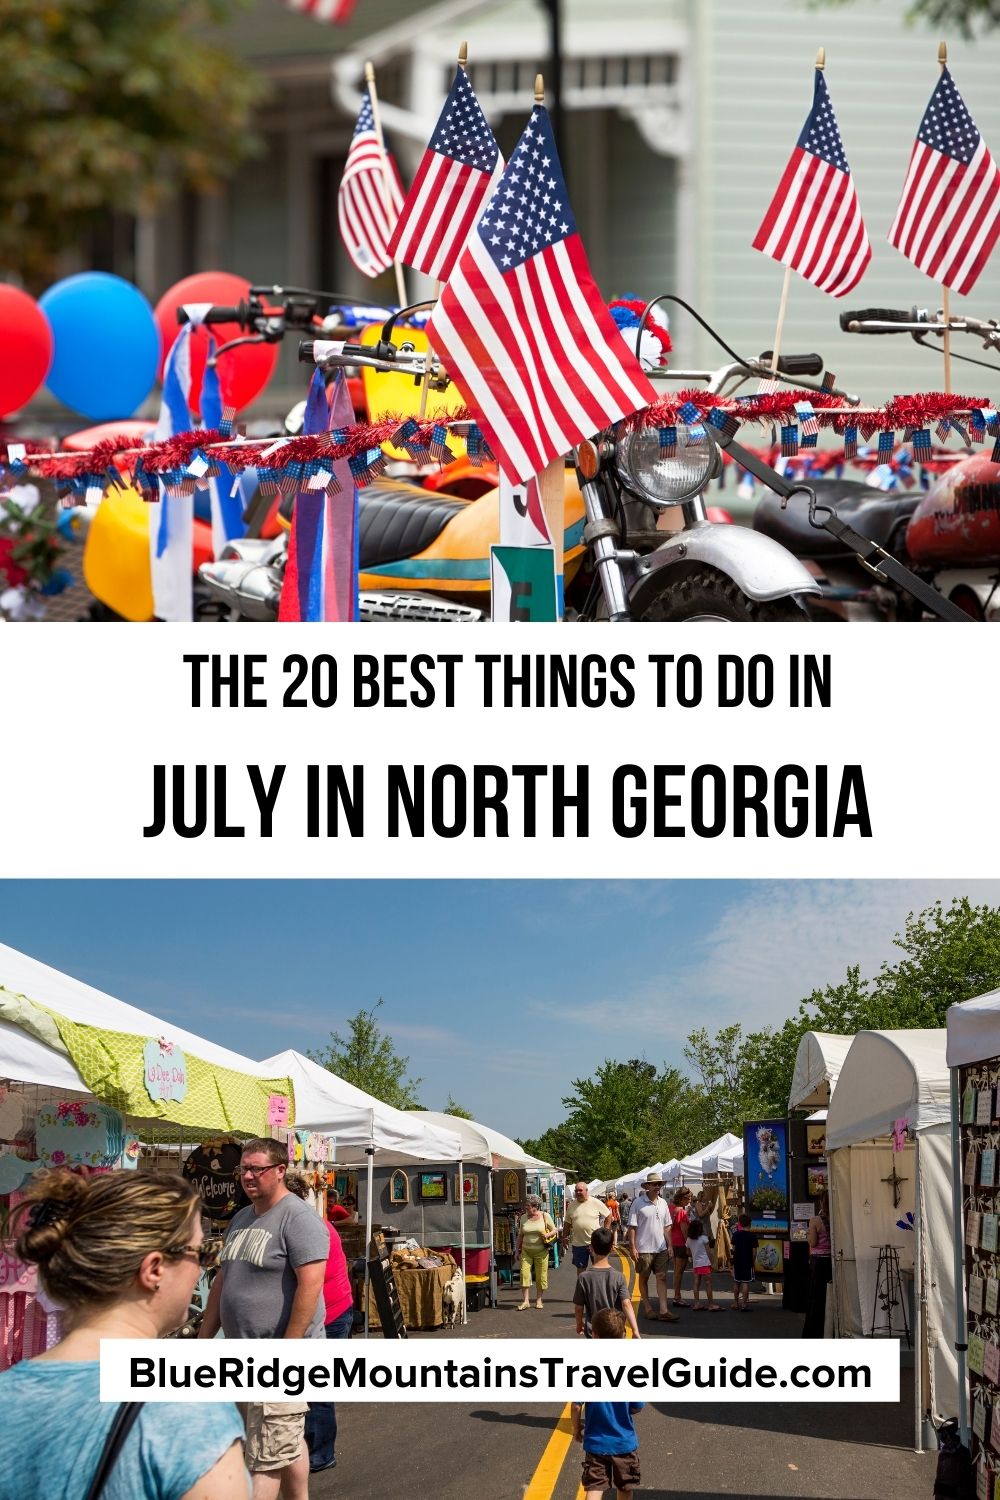 The 20 Best Things to Do in North GA in July 2022